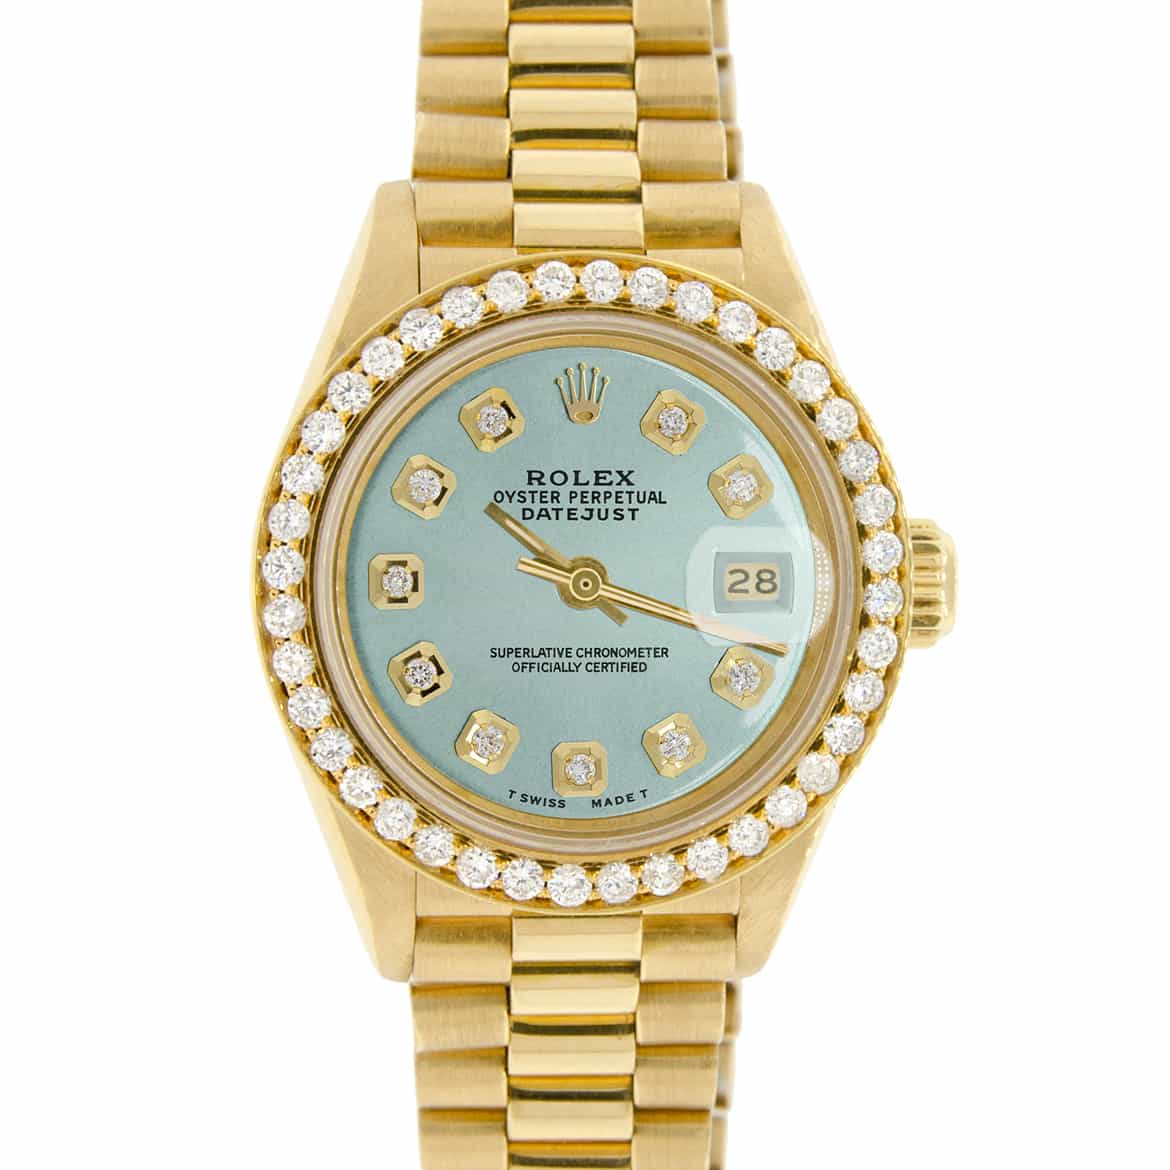 ROLEX OYSTER PERPETUAL DATEJUST PRESIDENTIAL Automatic 26mm 18K Yellow Gold  Diamond Watch